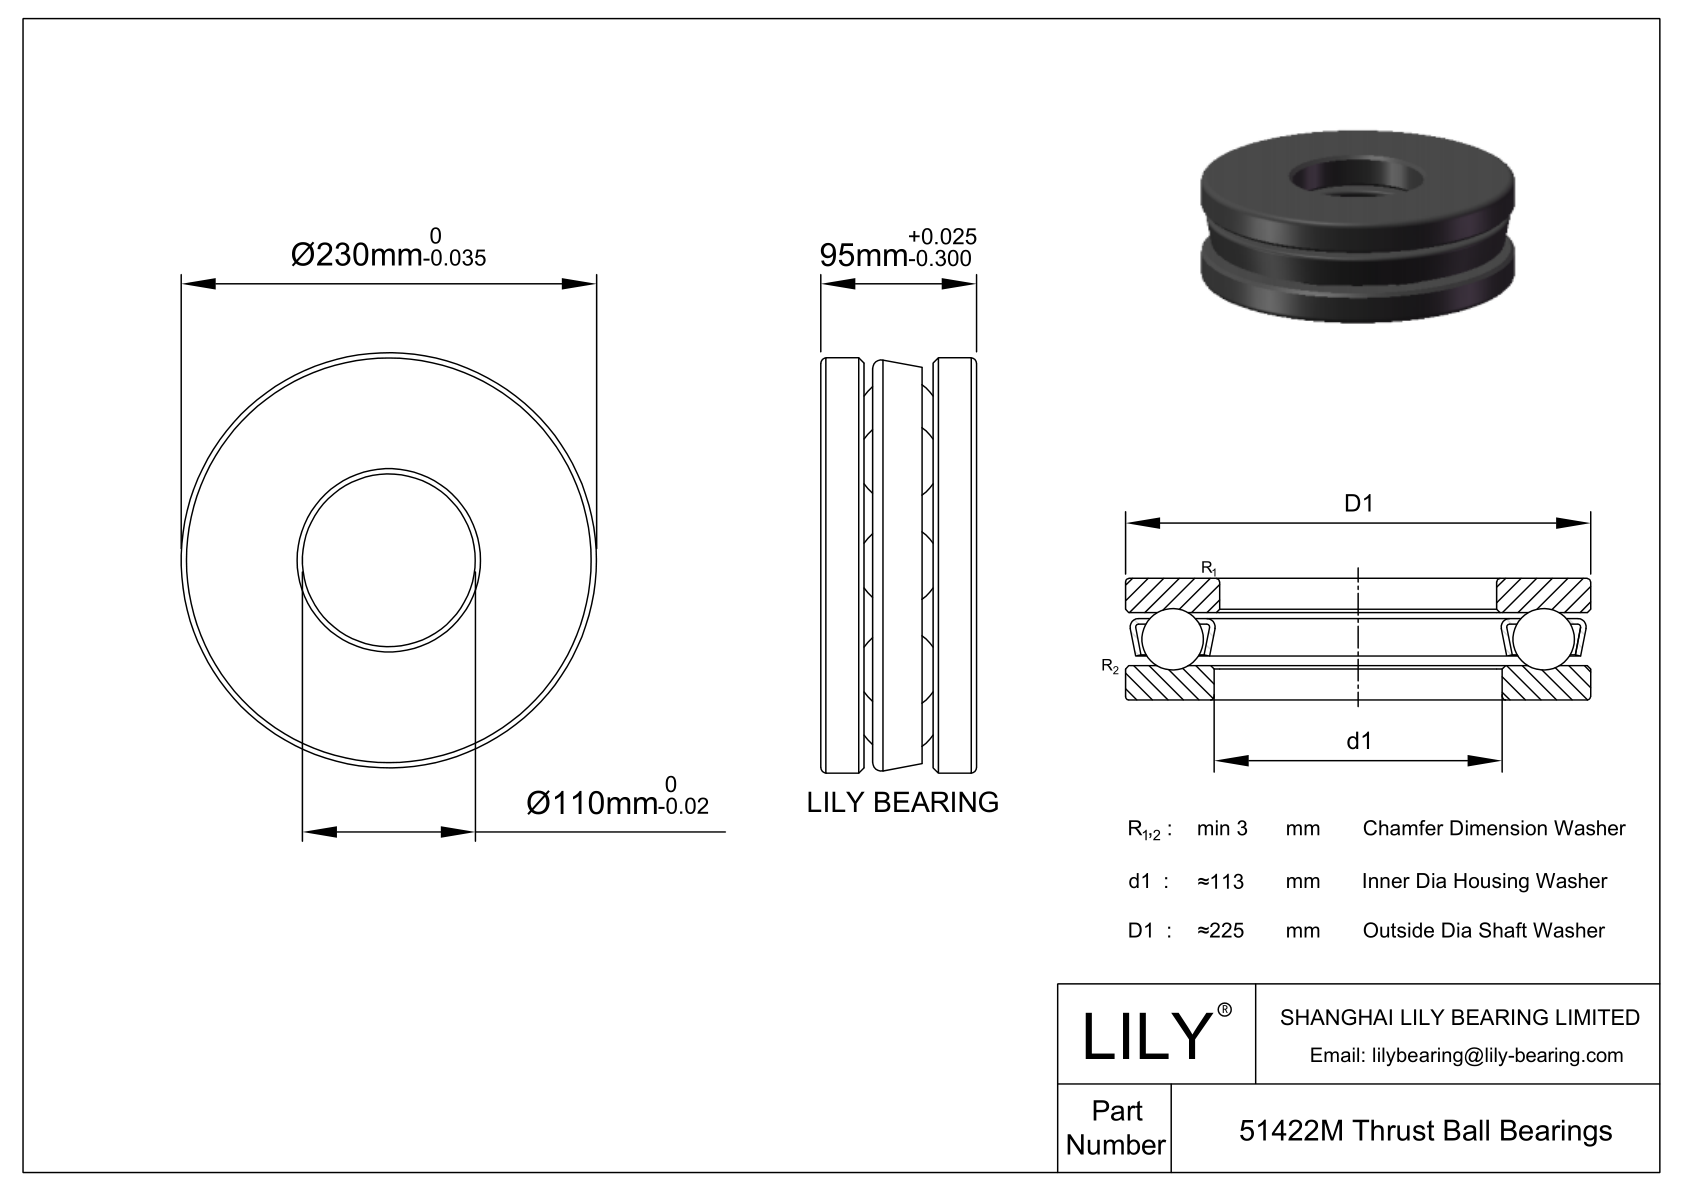 S51422 M Stainless Steel Single Direction Thrust Ball Bearing cad drawing